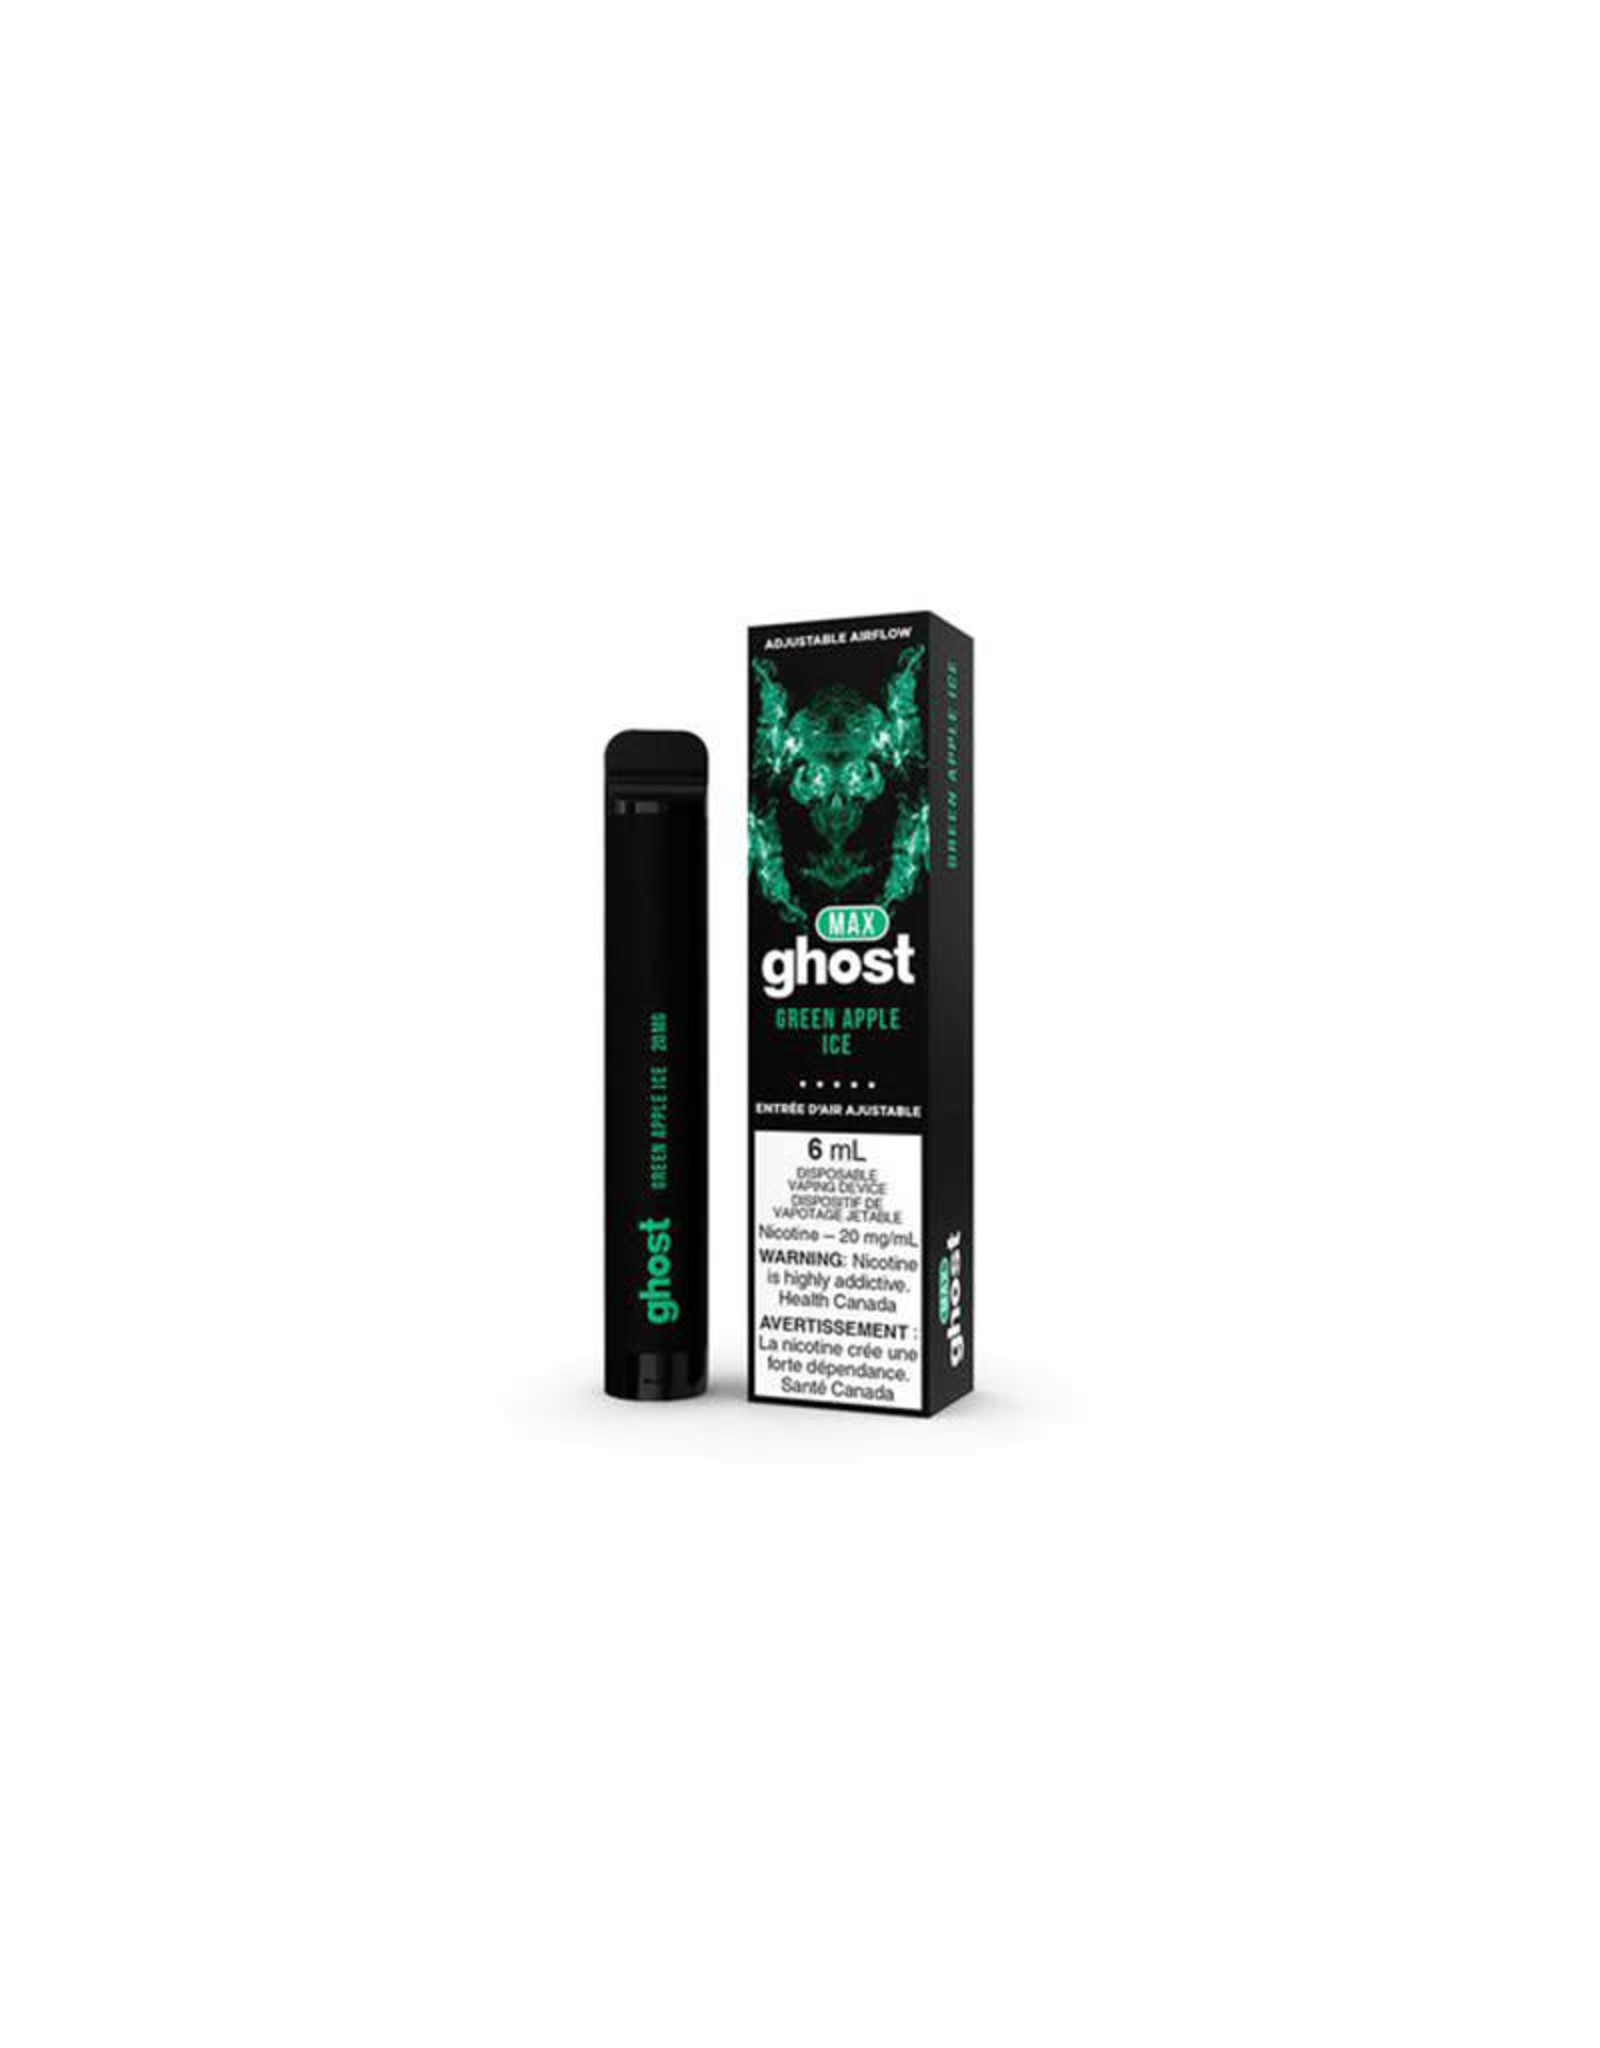 Ghost Max Ghost Max - Green Apple Ice